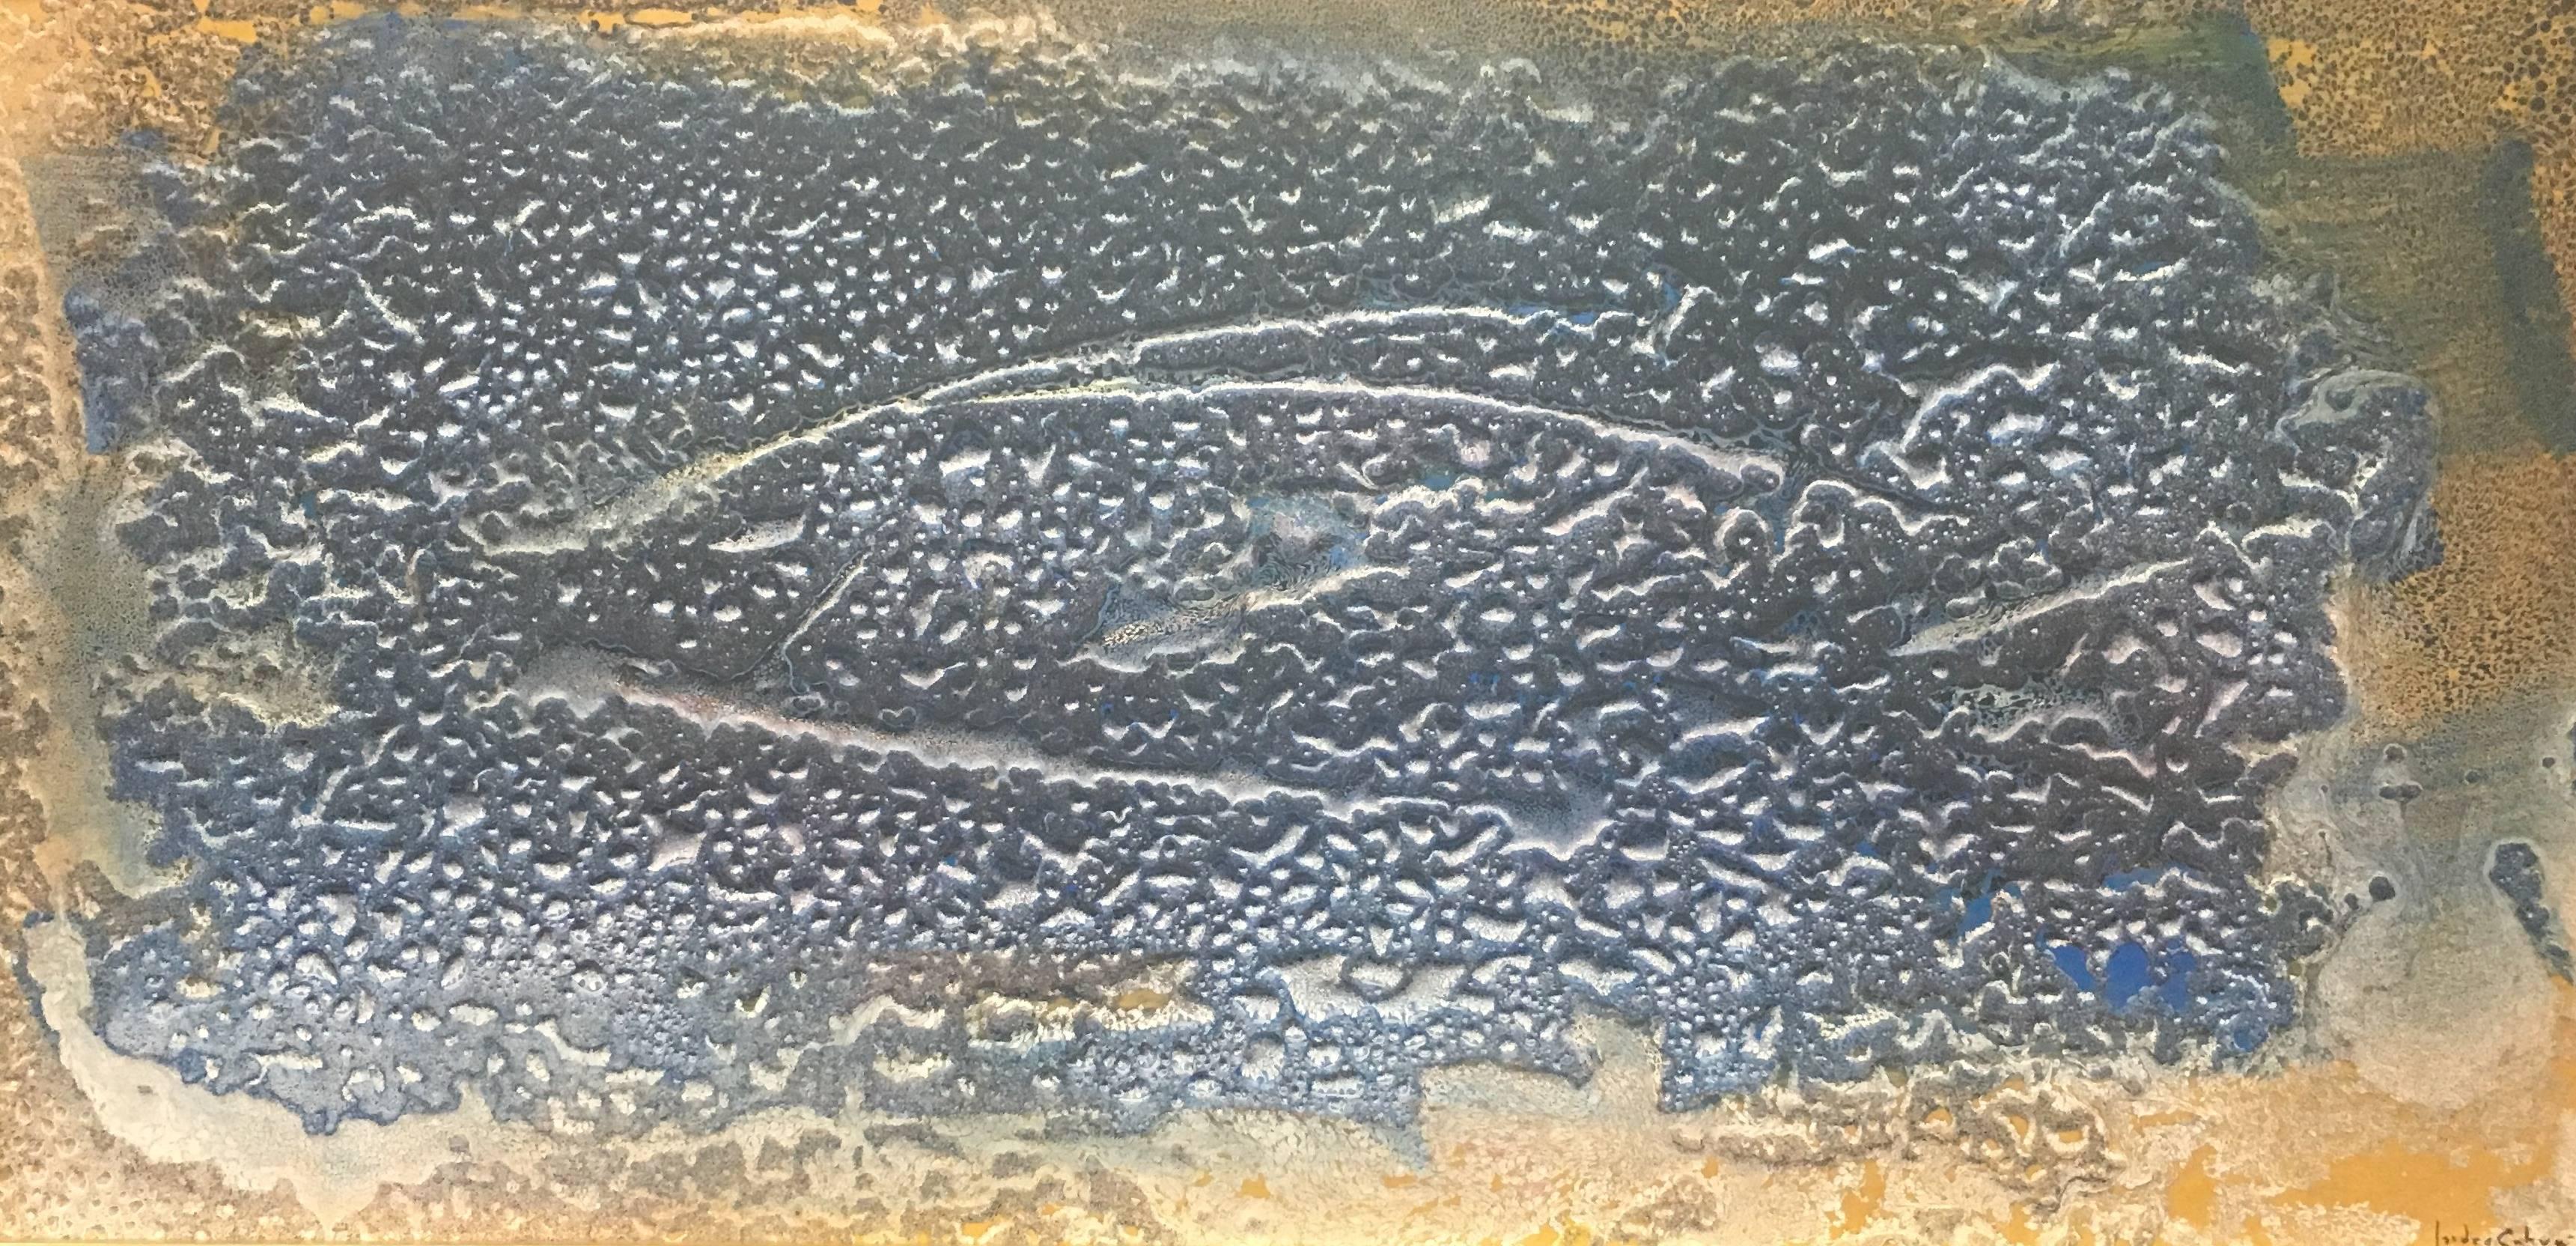 fish in the sea   original abstract acrylic  painting 
Artwork by Spanish artist ISIDRO CAHUE.
Acrylic on wood
Perfect state

The personality of the artist is reflected in different fields of art. His concern for the subject, his experience, his